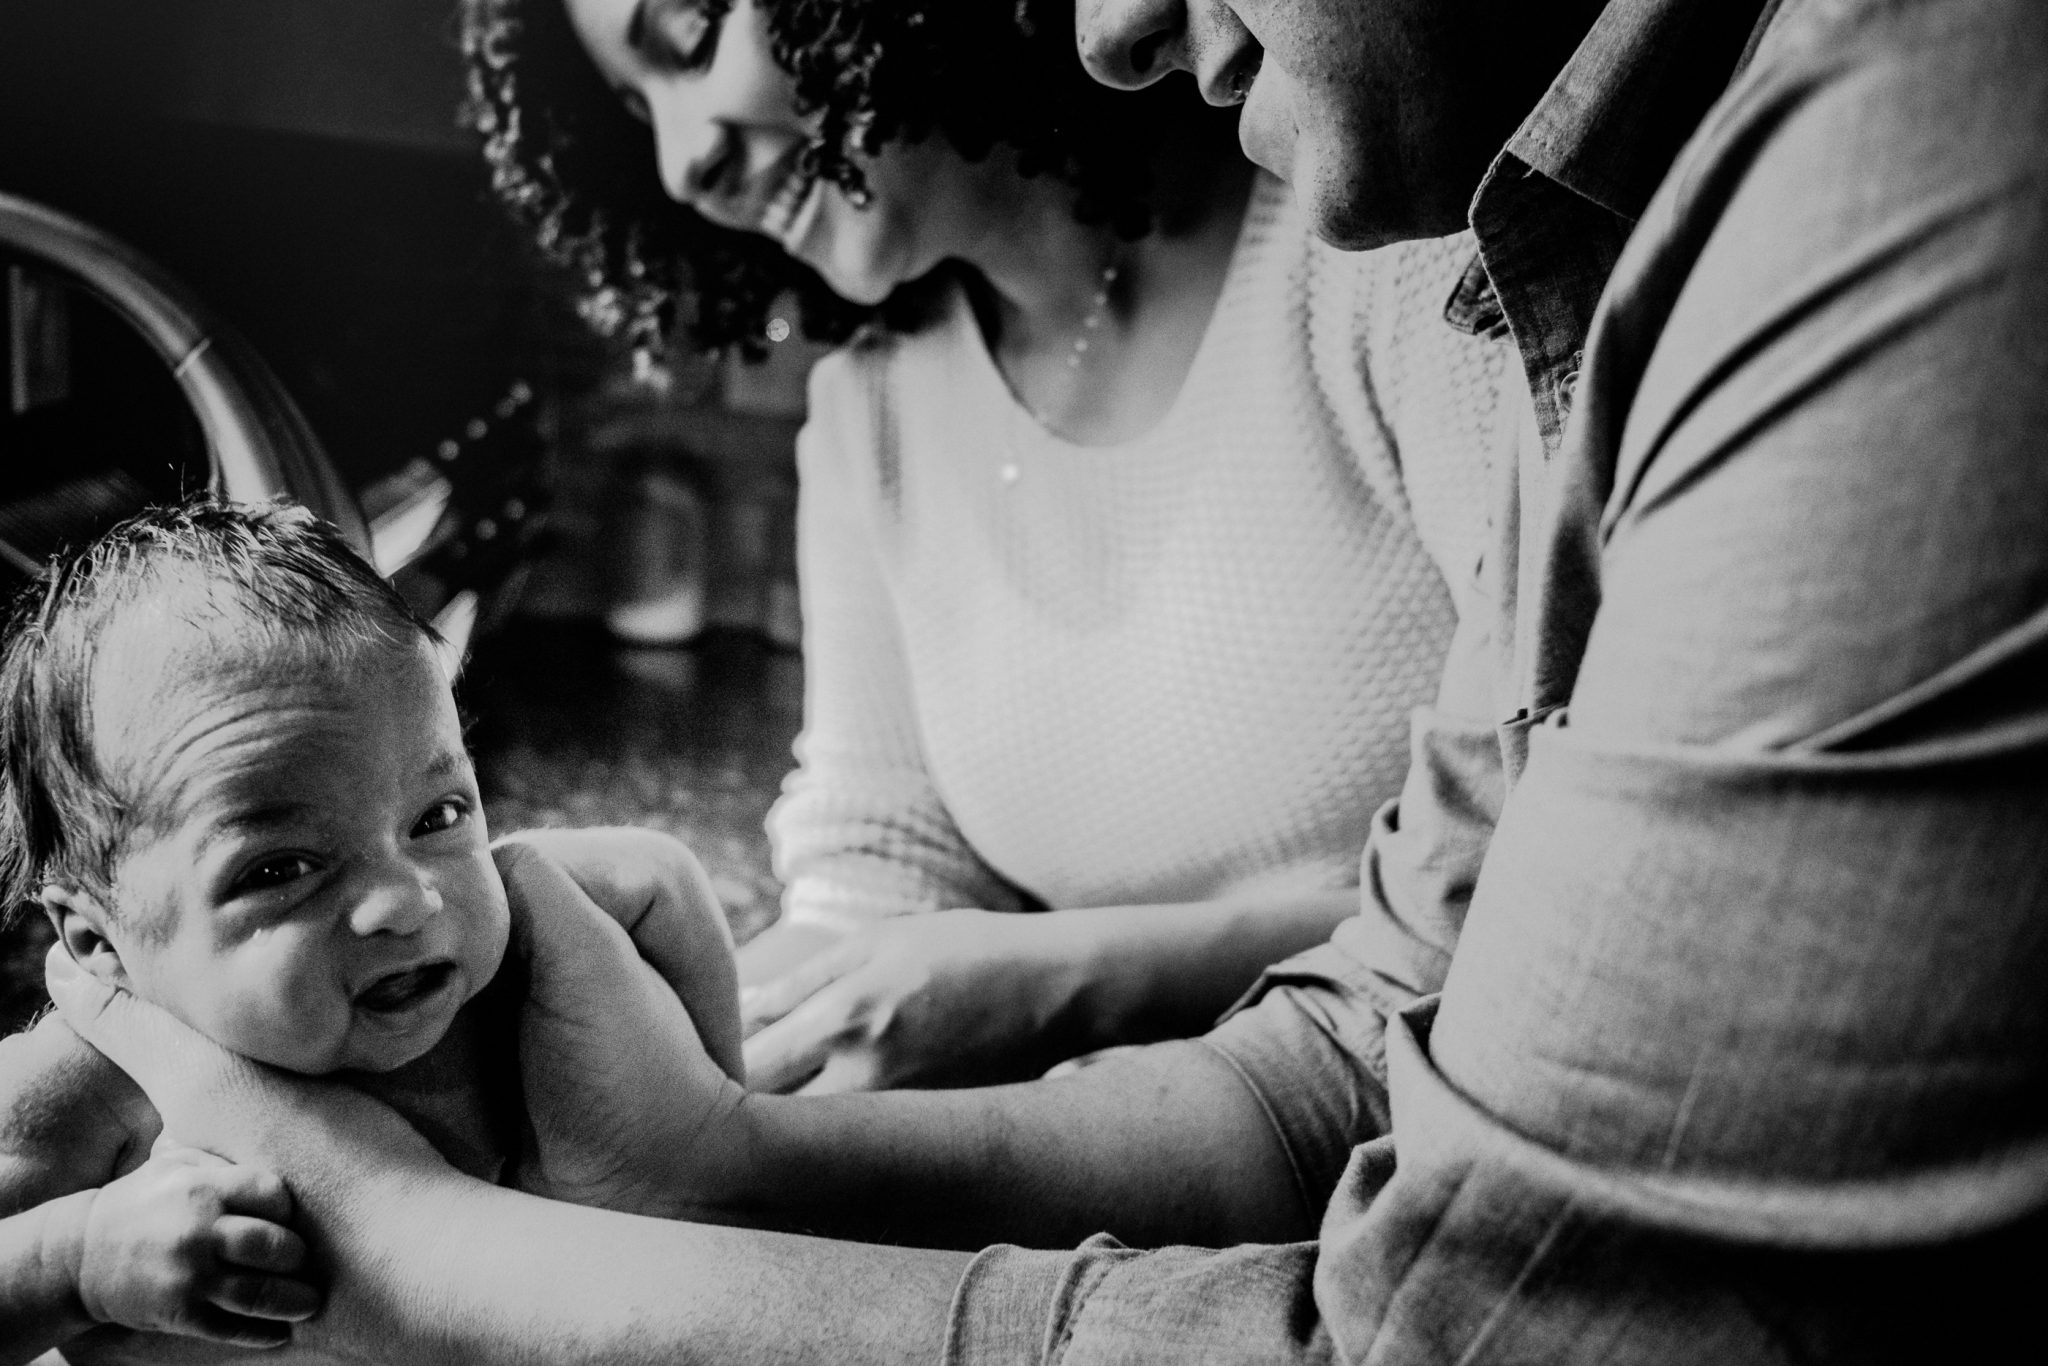 documenting baby's first bath and parent's expressions in black and white photo